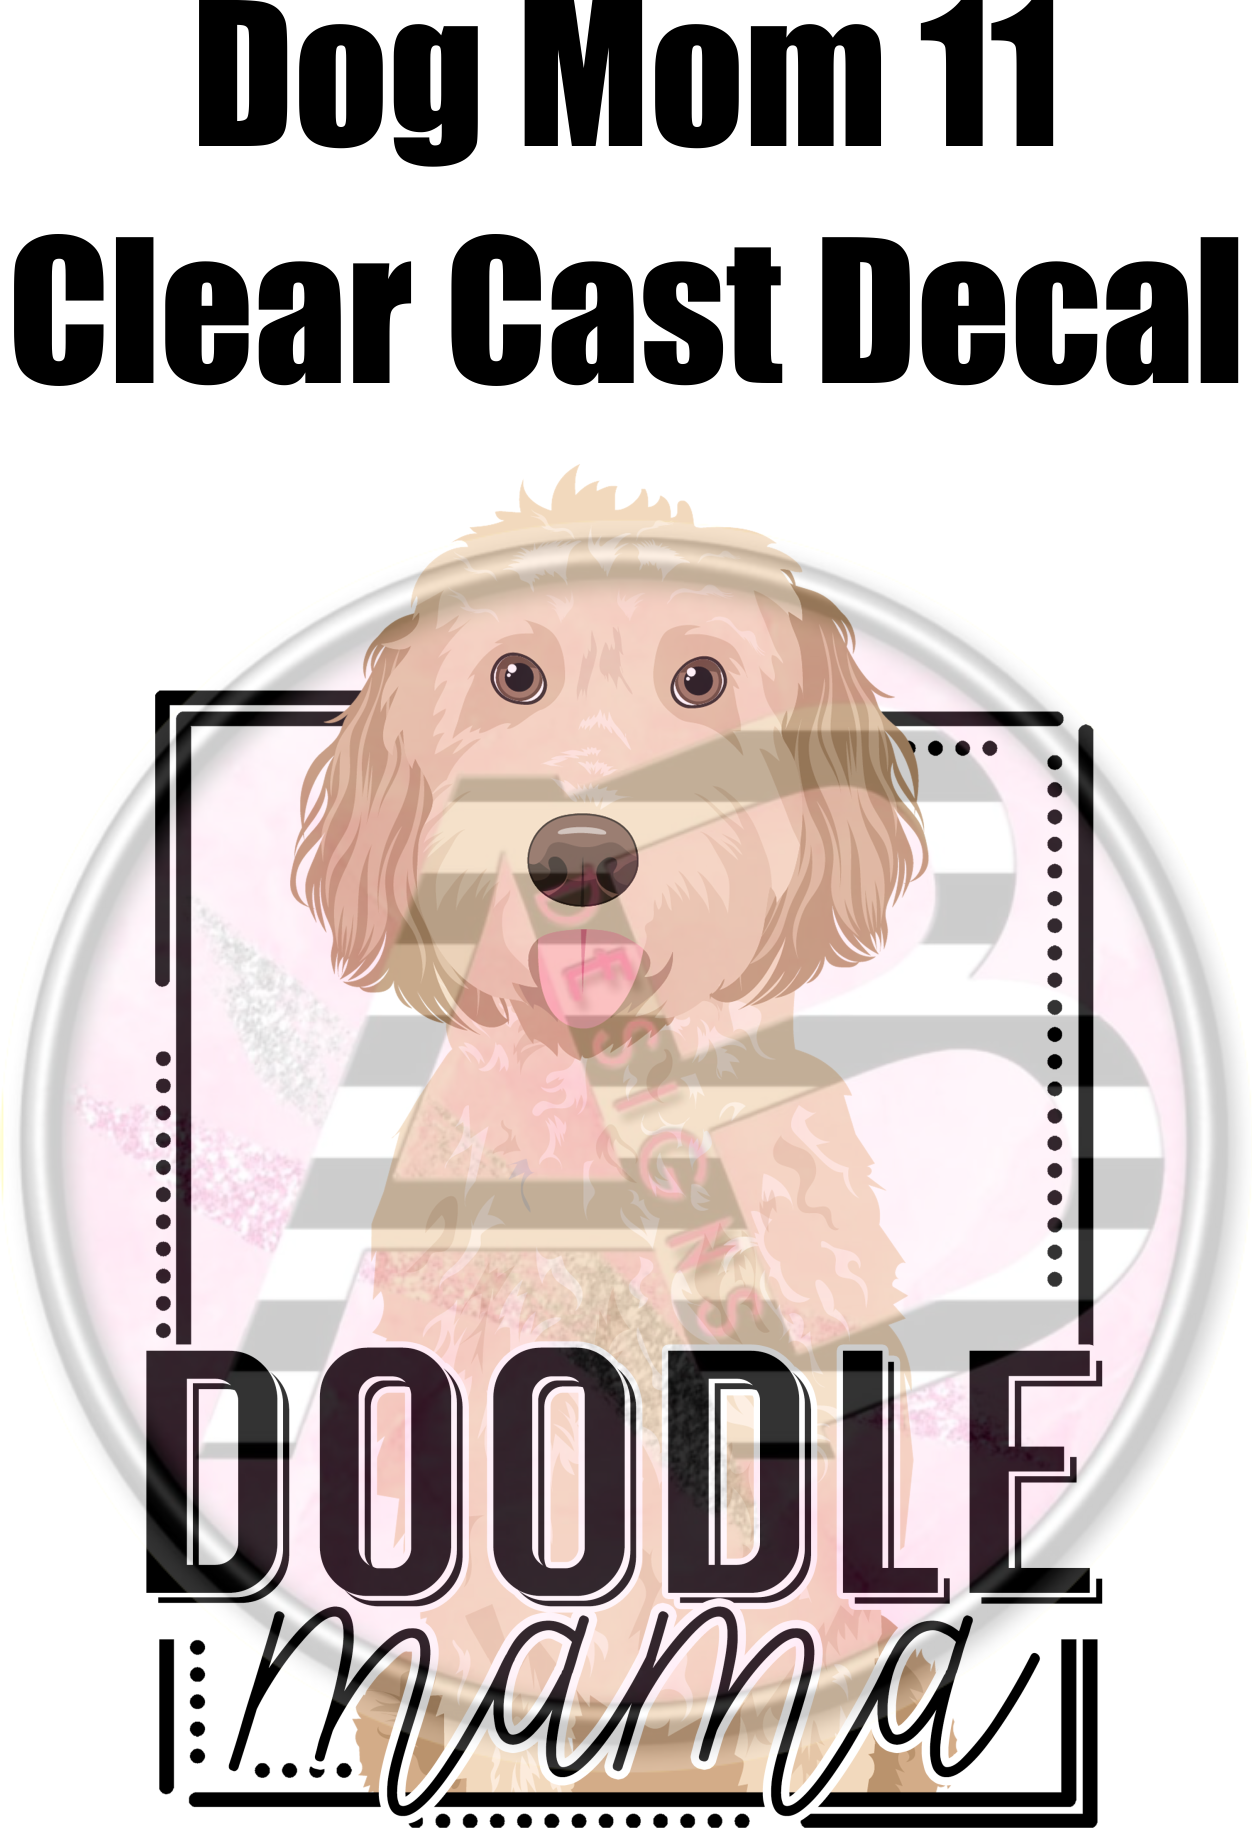 Dog Mom 11 - Clear Cast Decal - 99